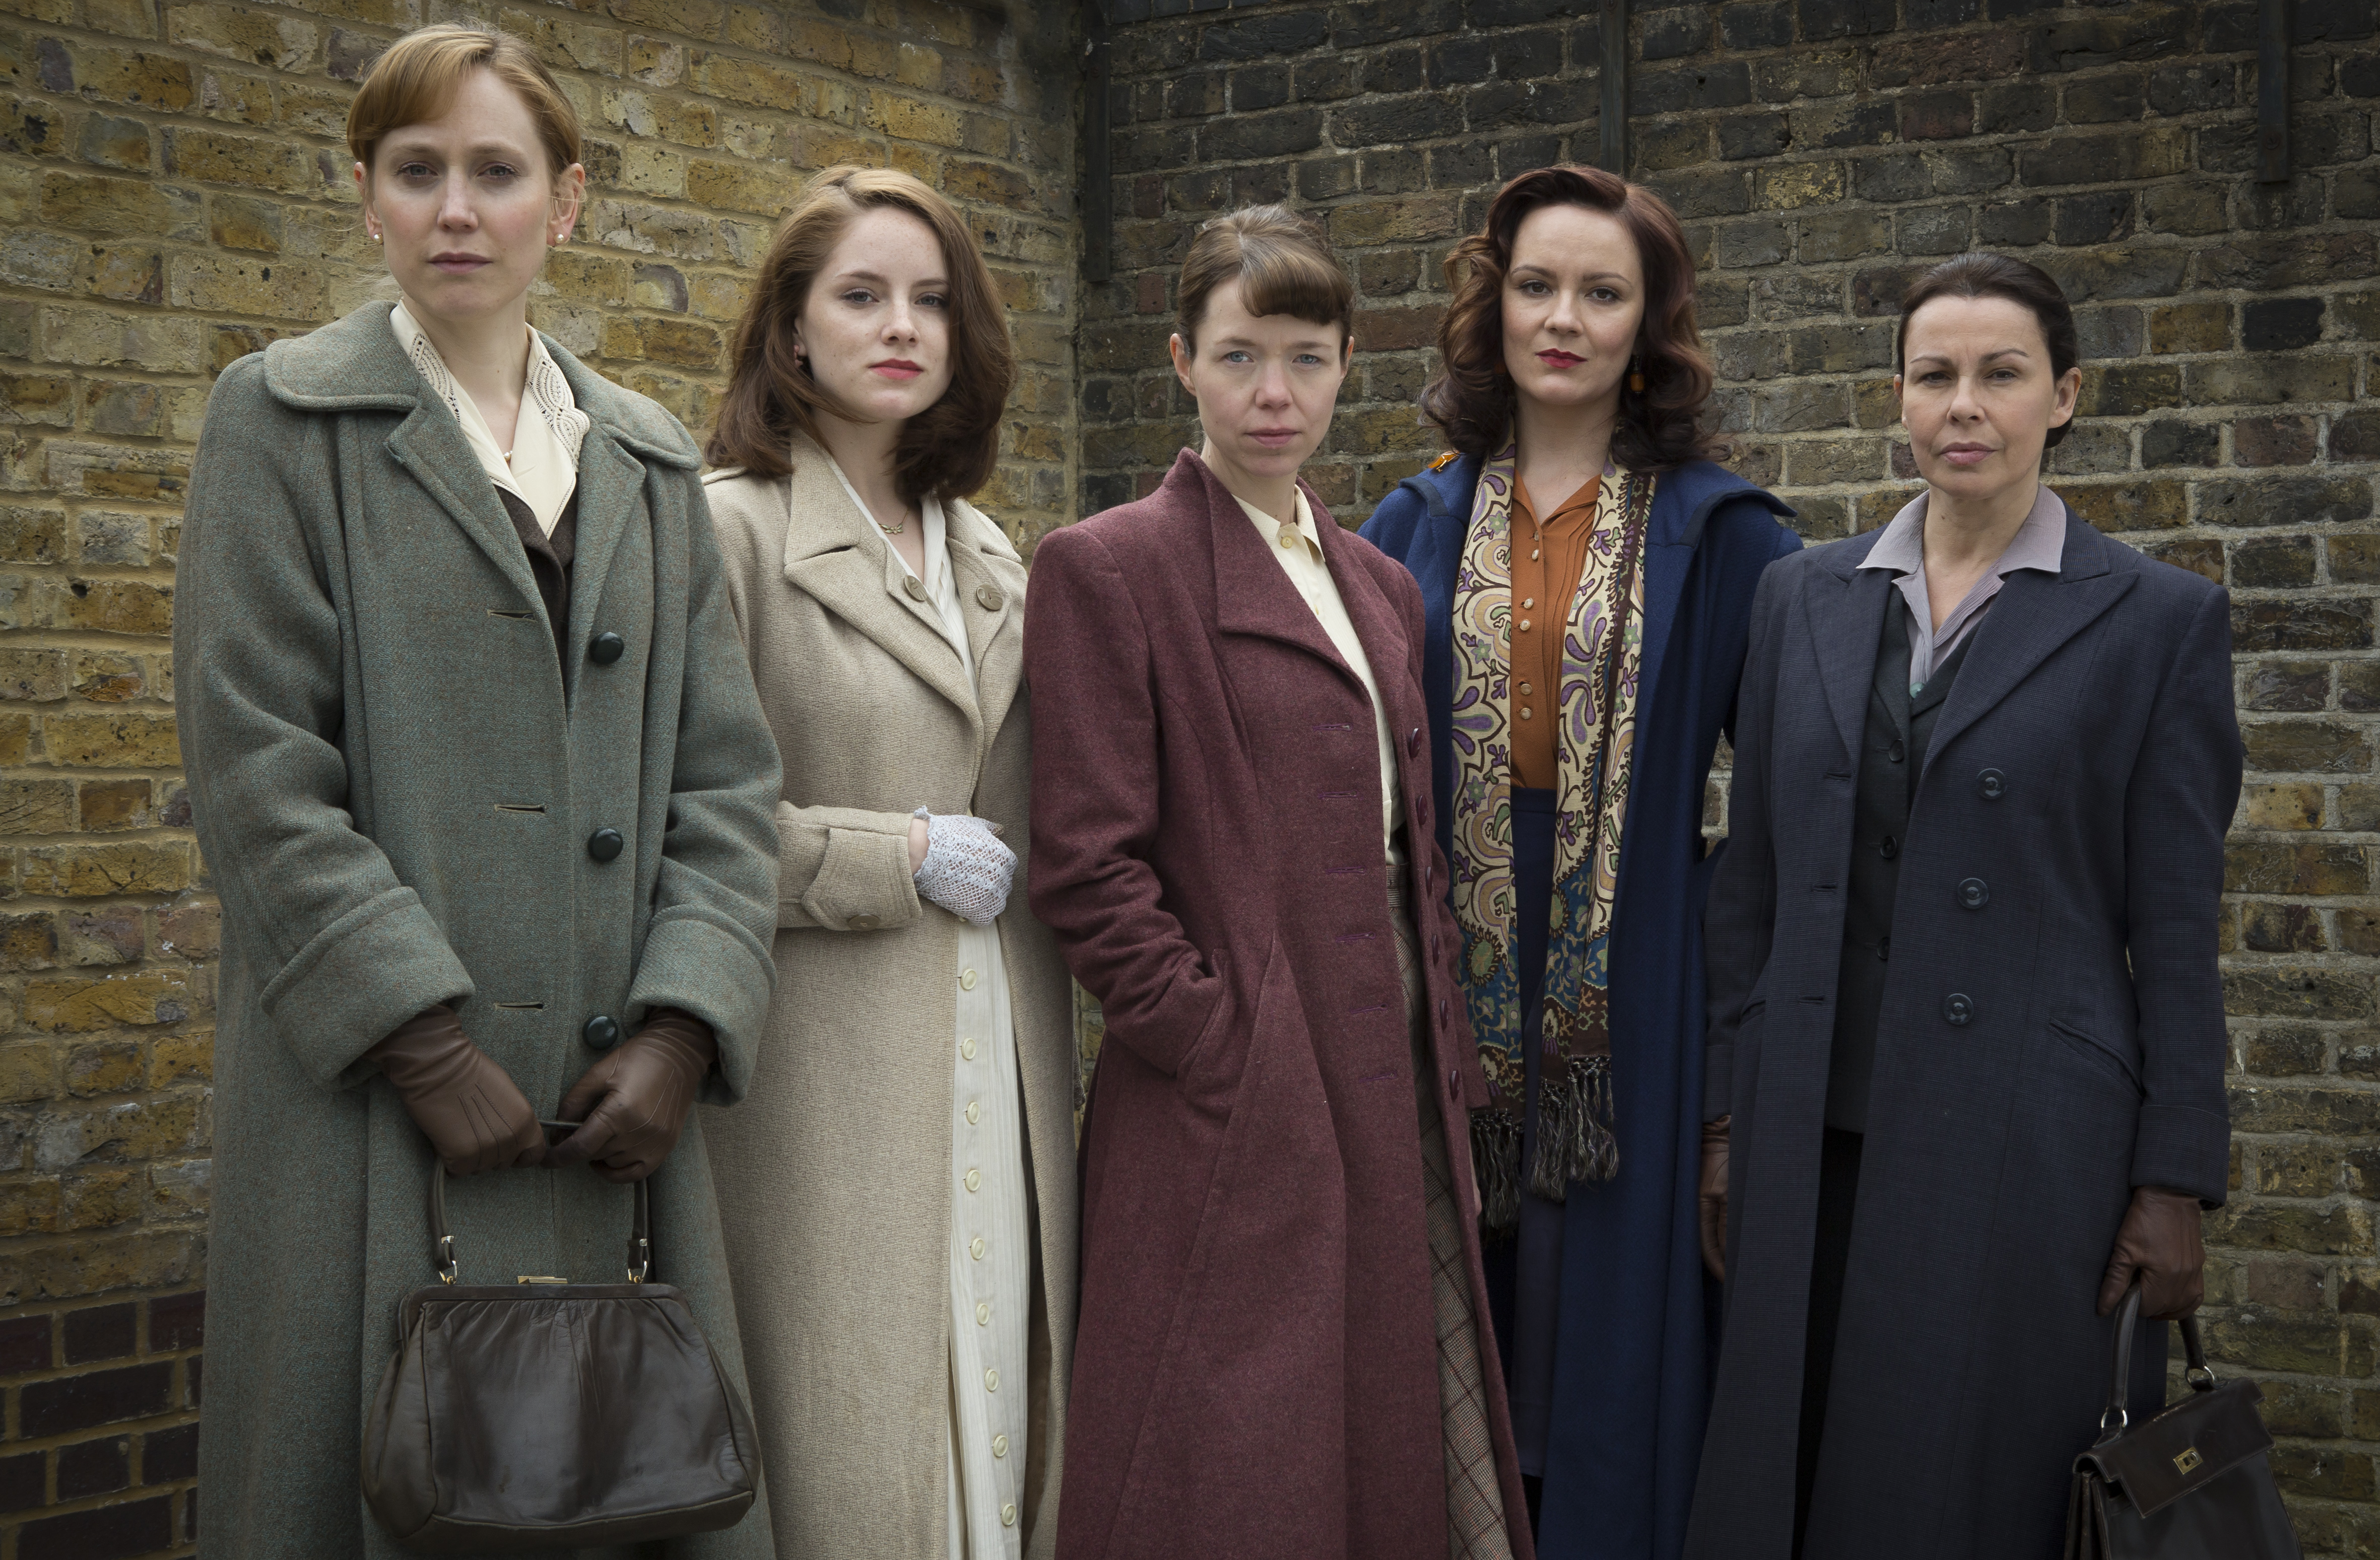 The ladies of "The Bletchley Circle" (Photo: Courtesy of ©World Productions 2013)